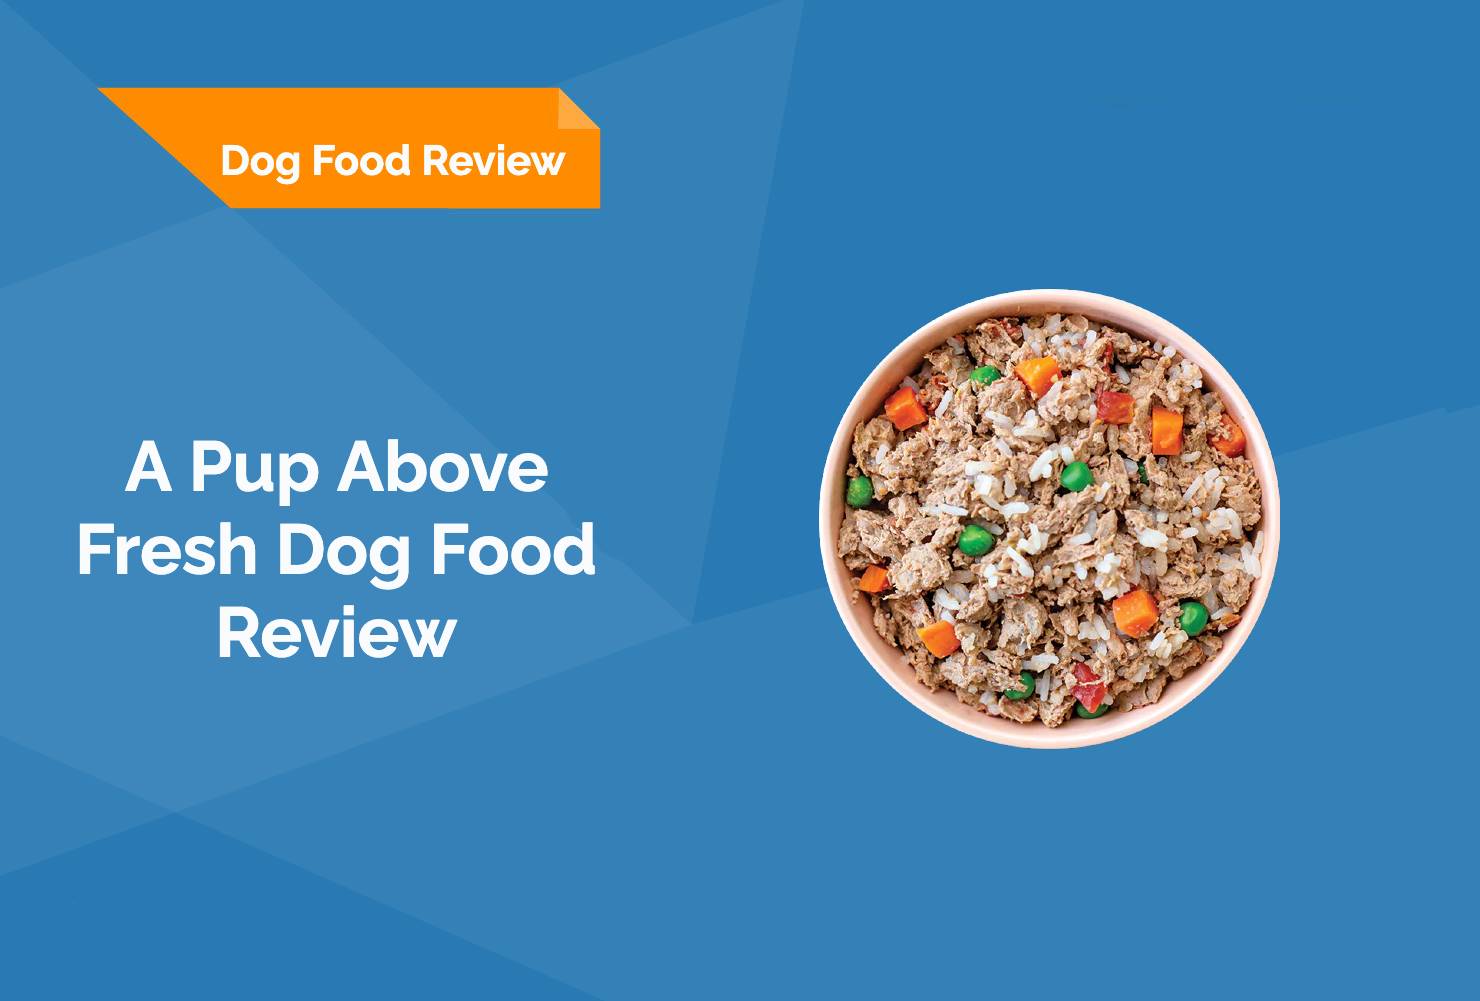 A Pup Above Fresh Dog Food Review